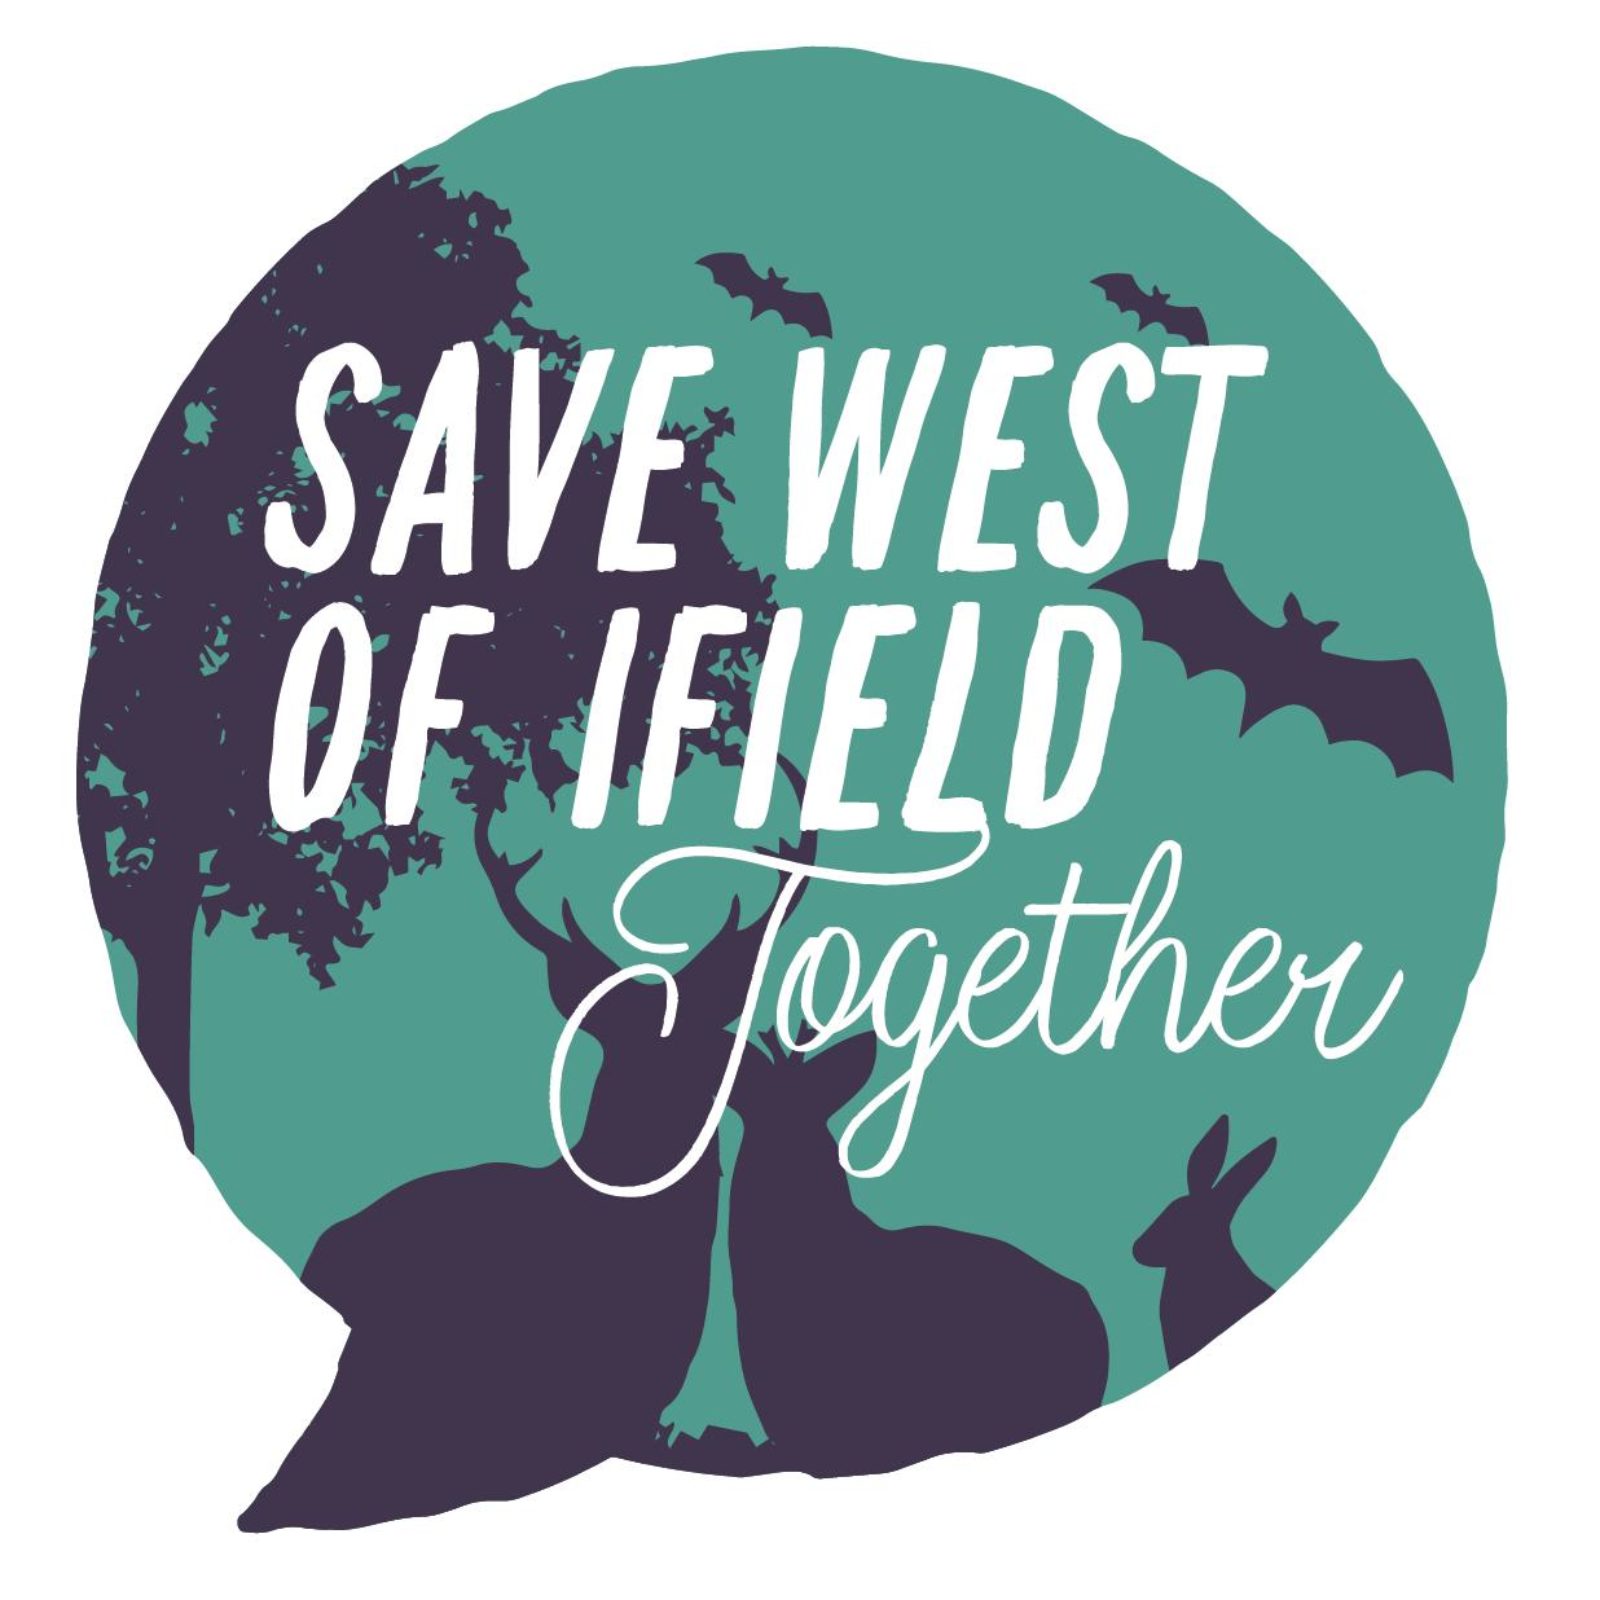 Save West of Ifield  - Together